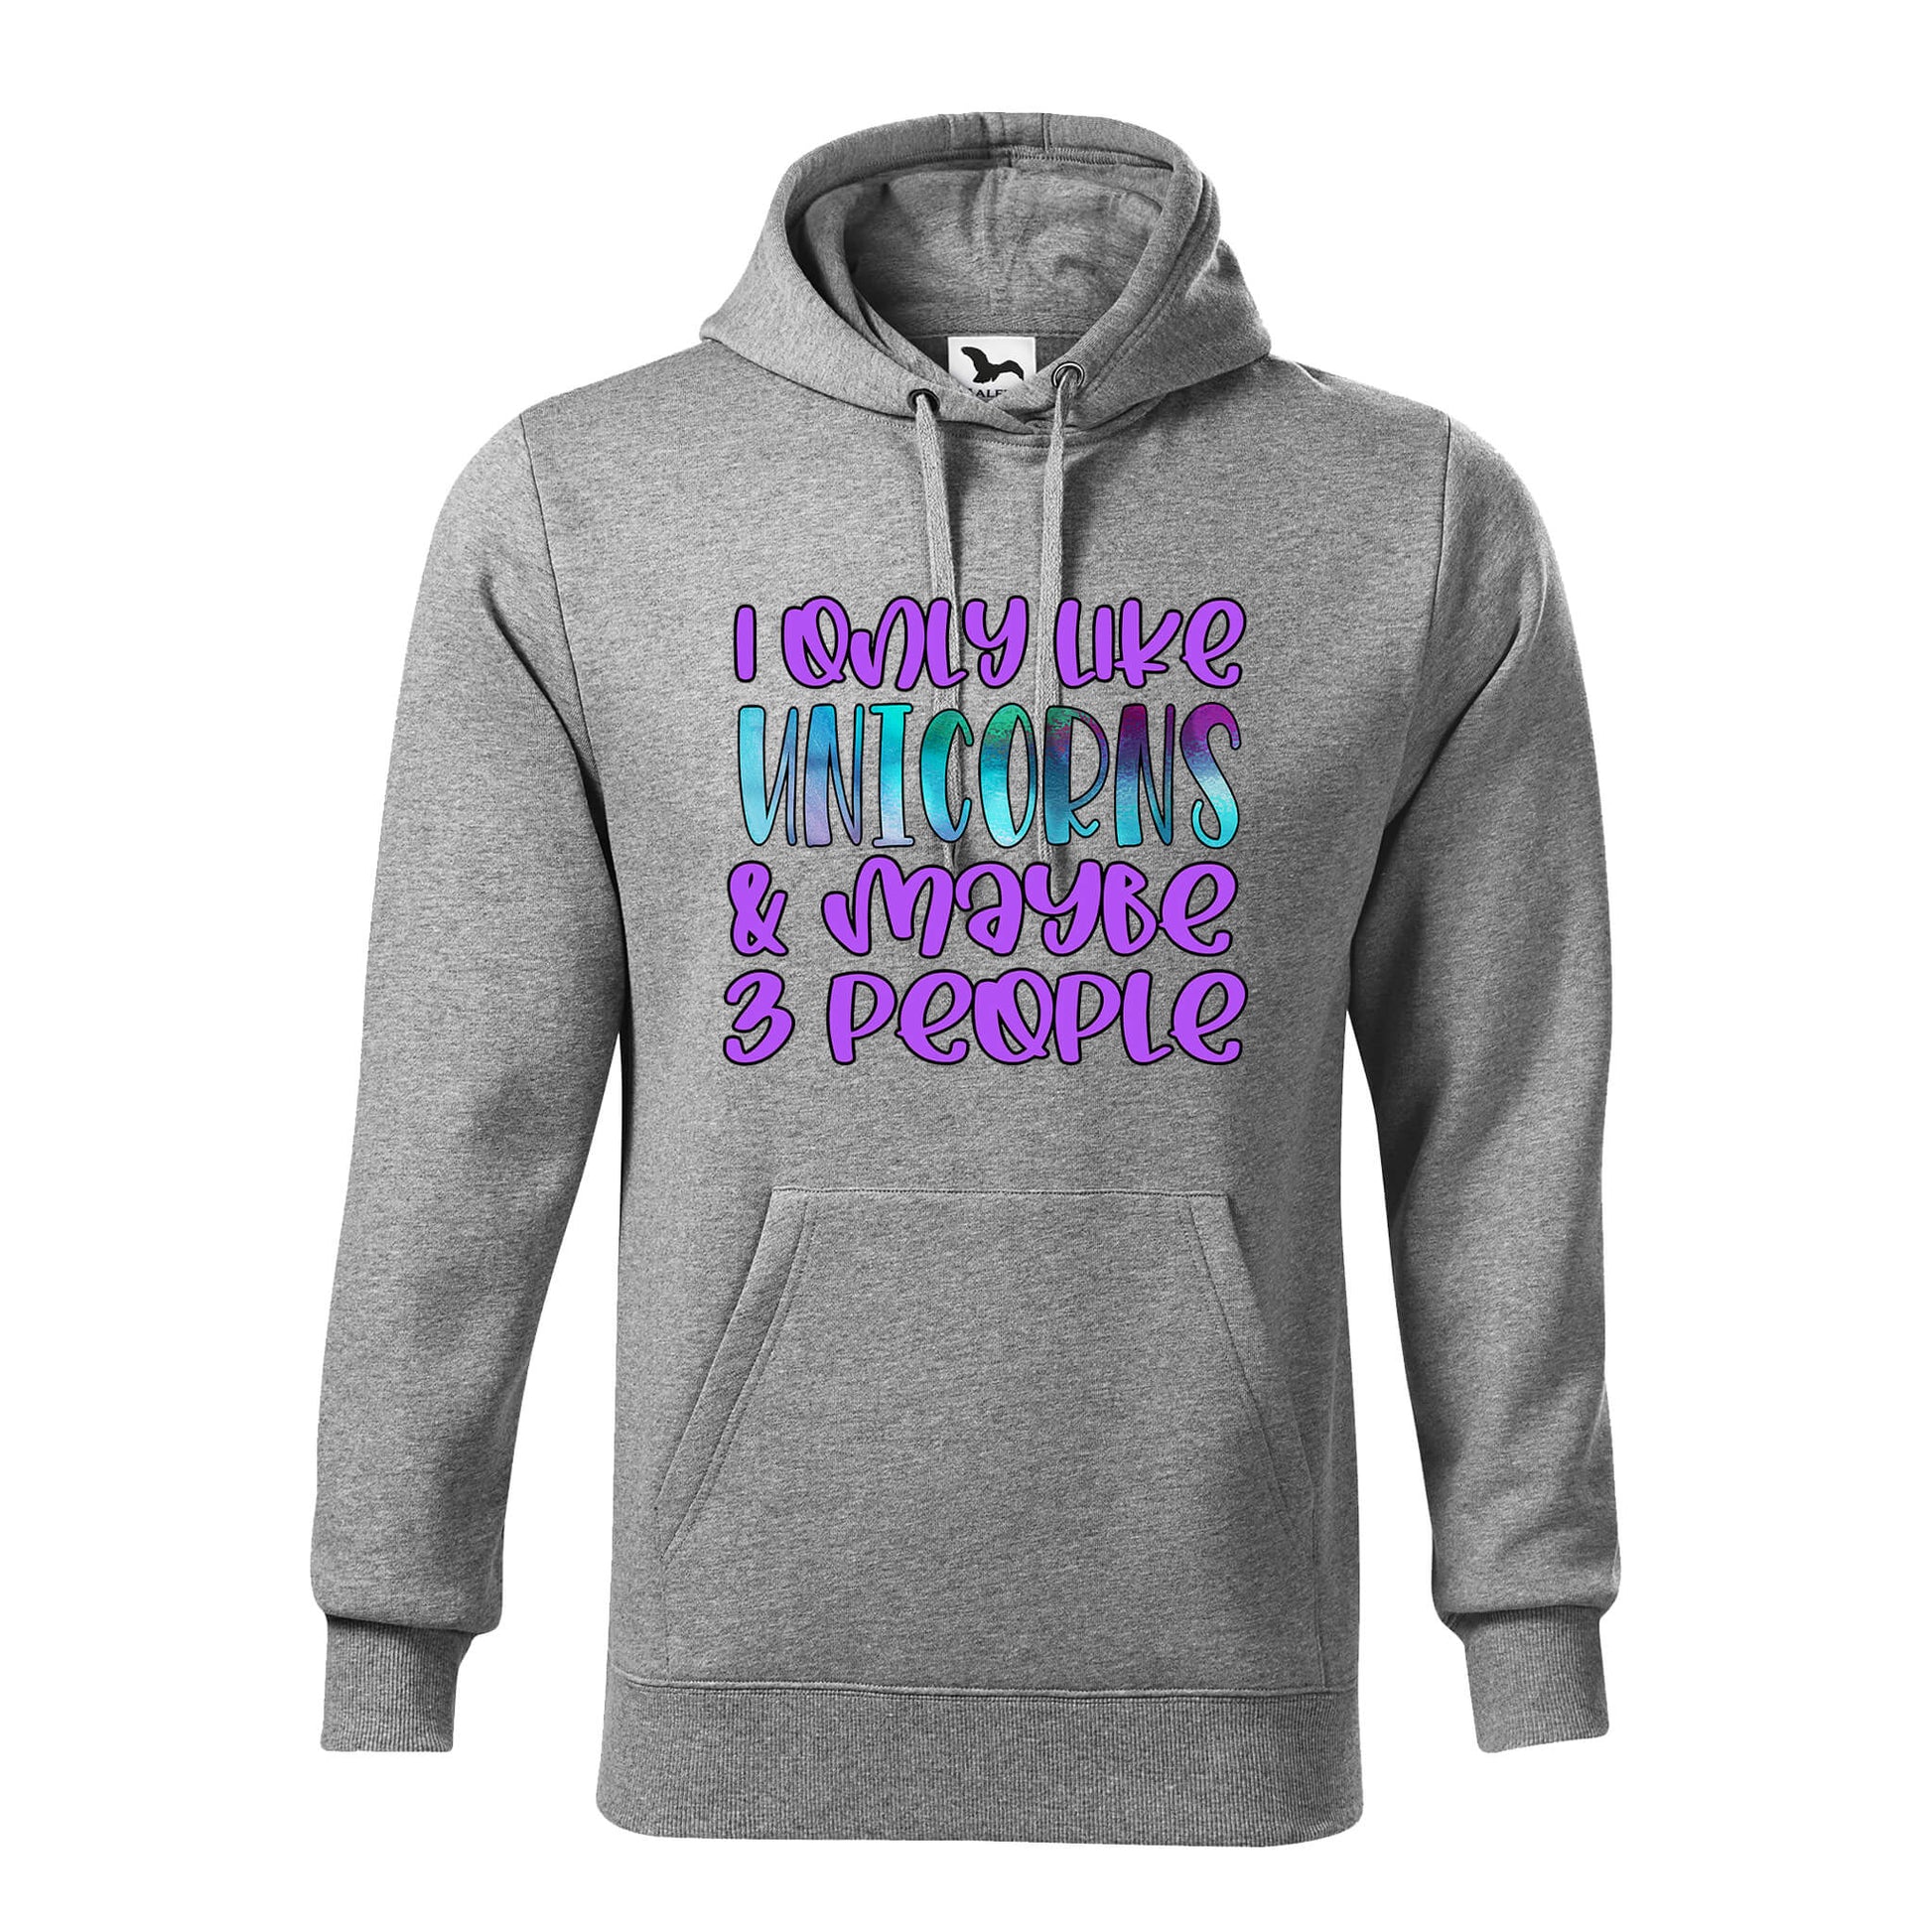 I only like unicorns and maybe 3 people hoodie - rvdesignprint